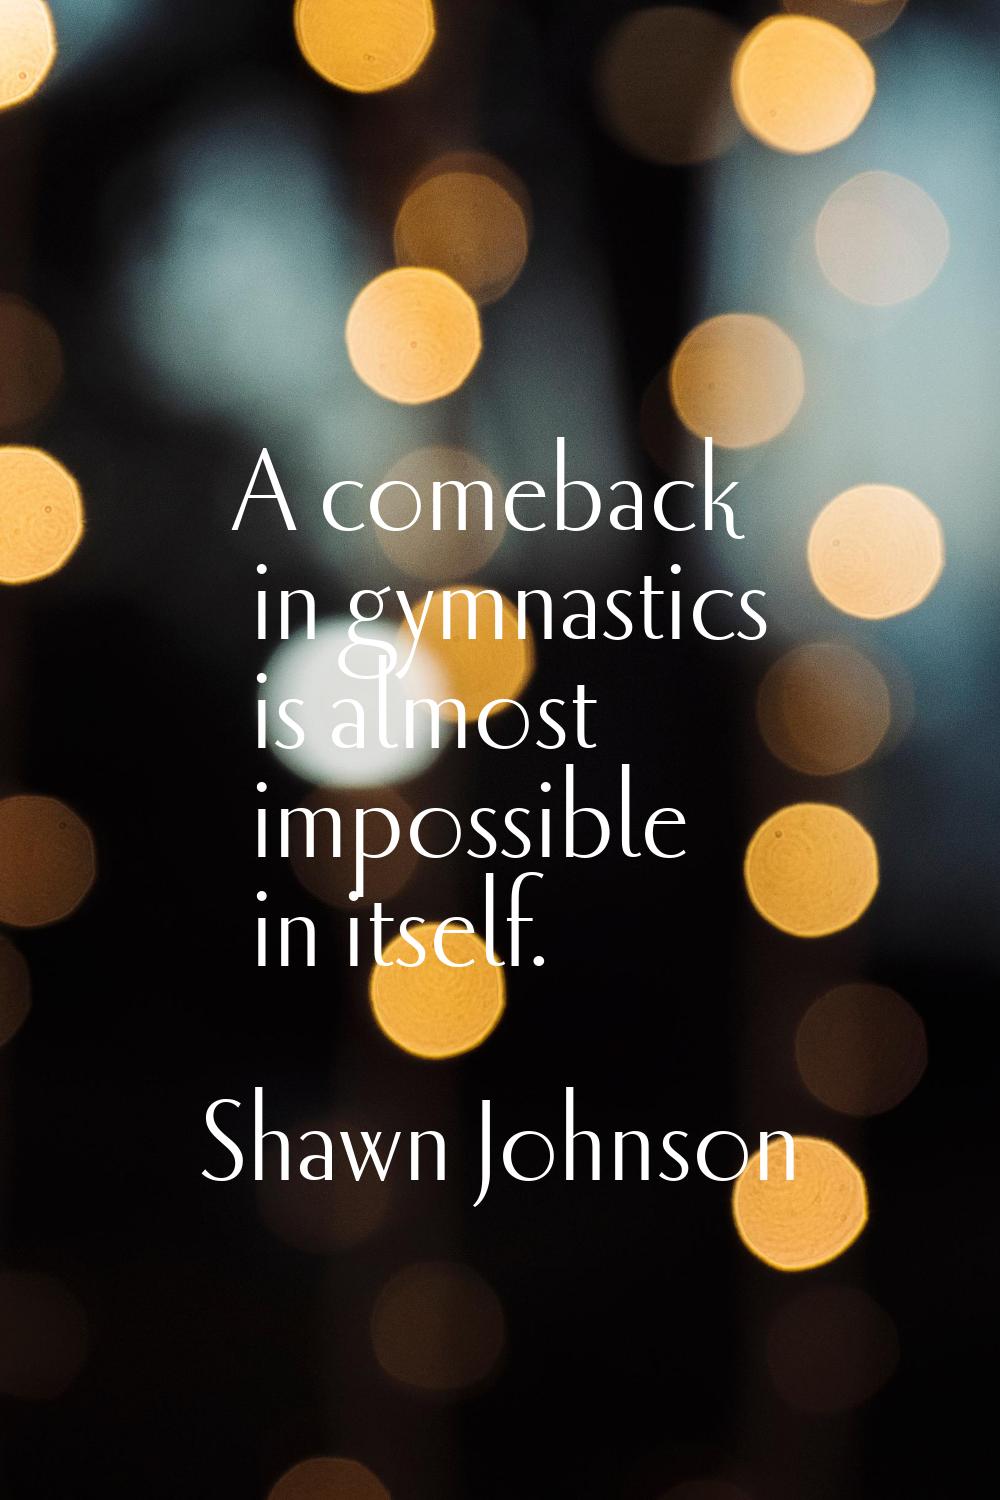 A comeback in gymnastics is almost impossible in itself.